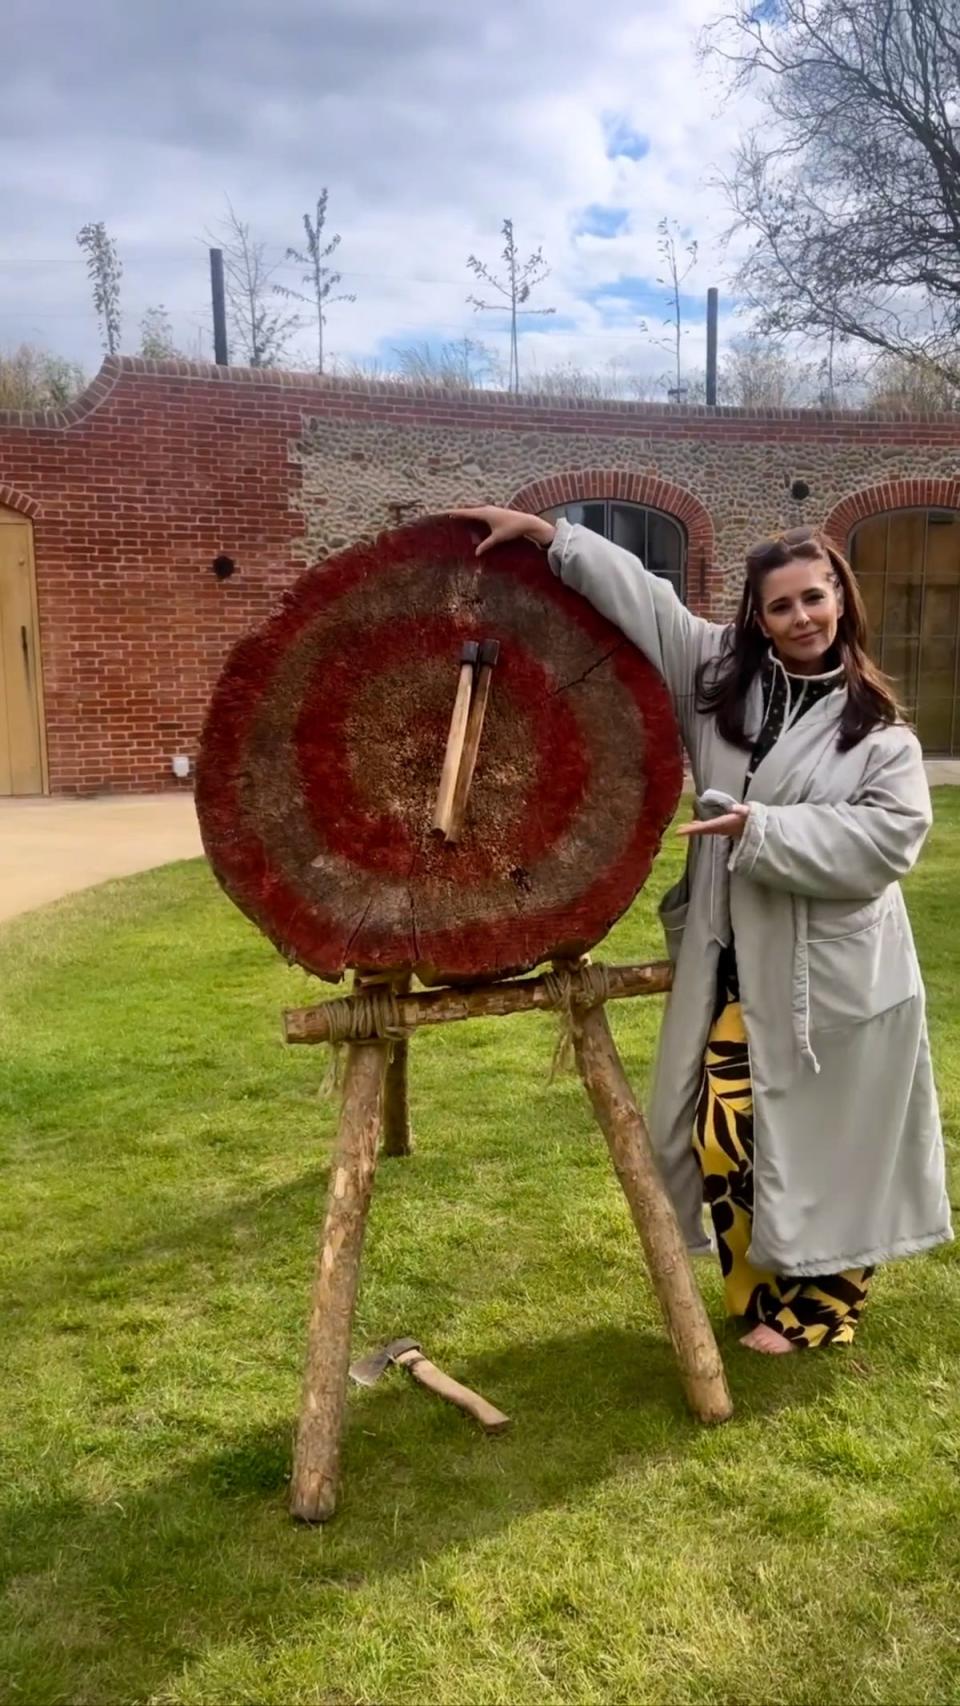 Cheryl tried her hand at axe throwing during her birthday weekend away (Instagram/ cherylofficial)